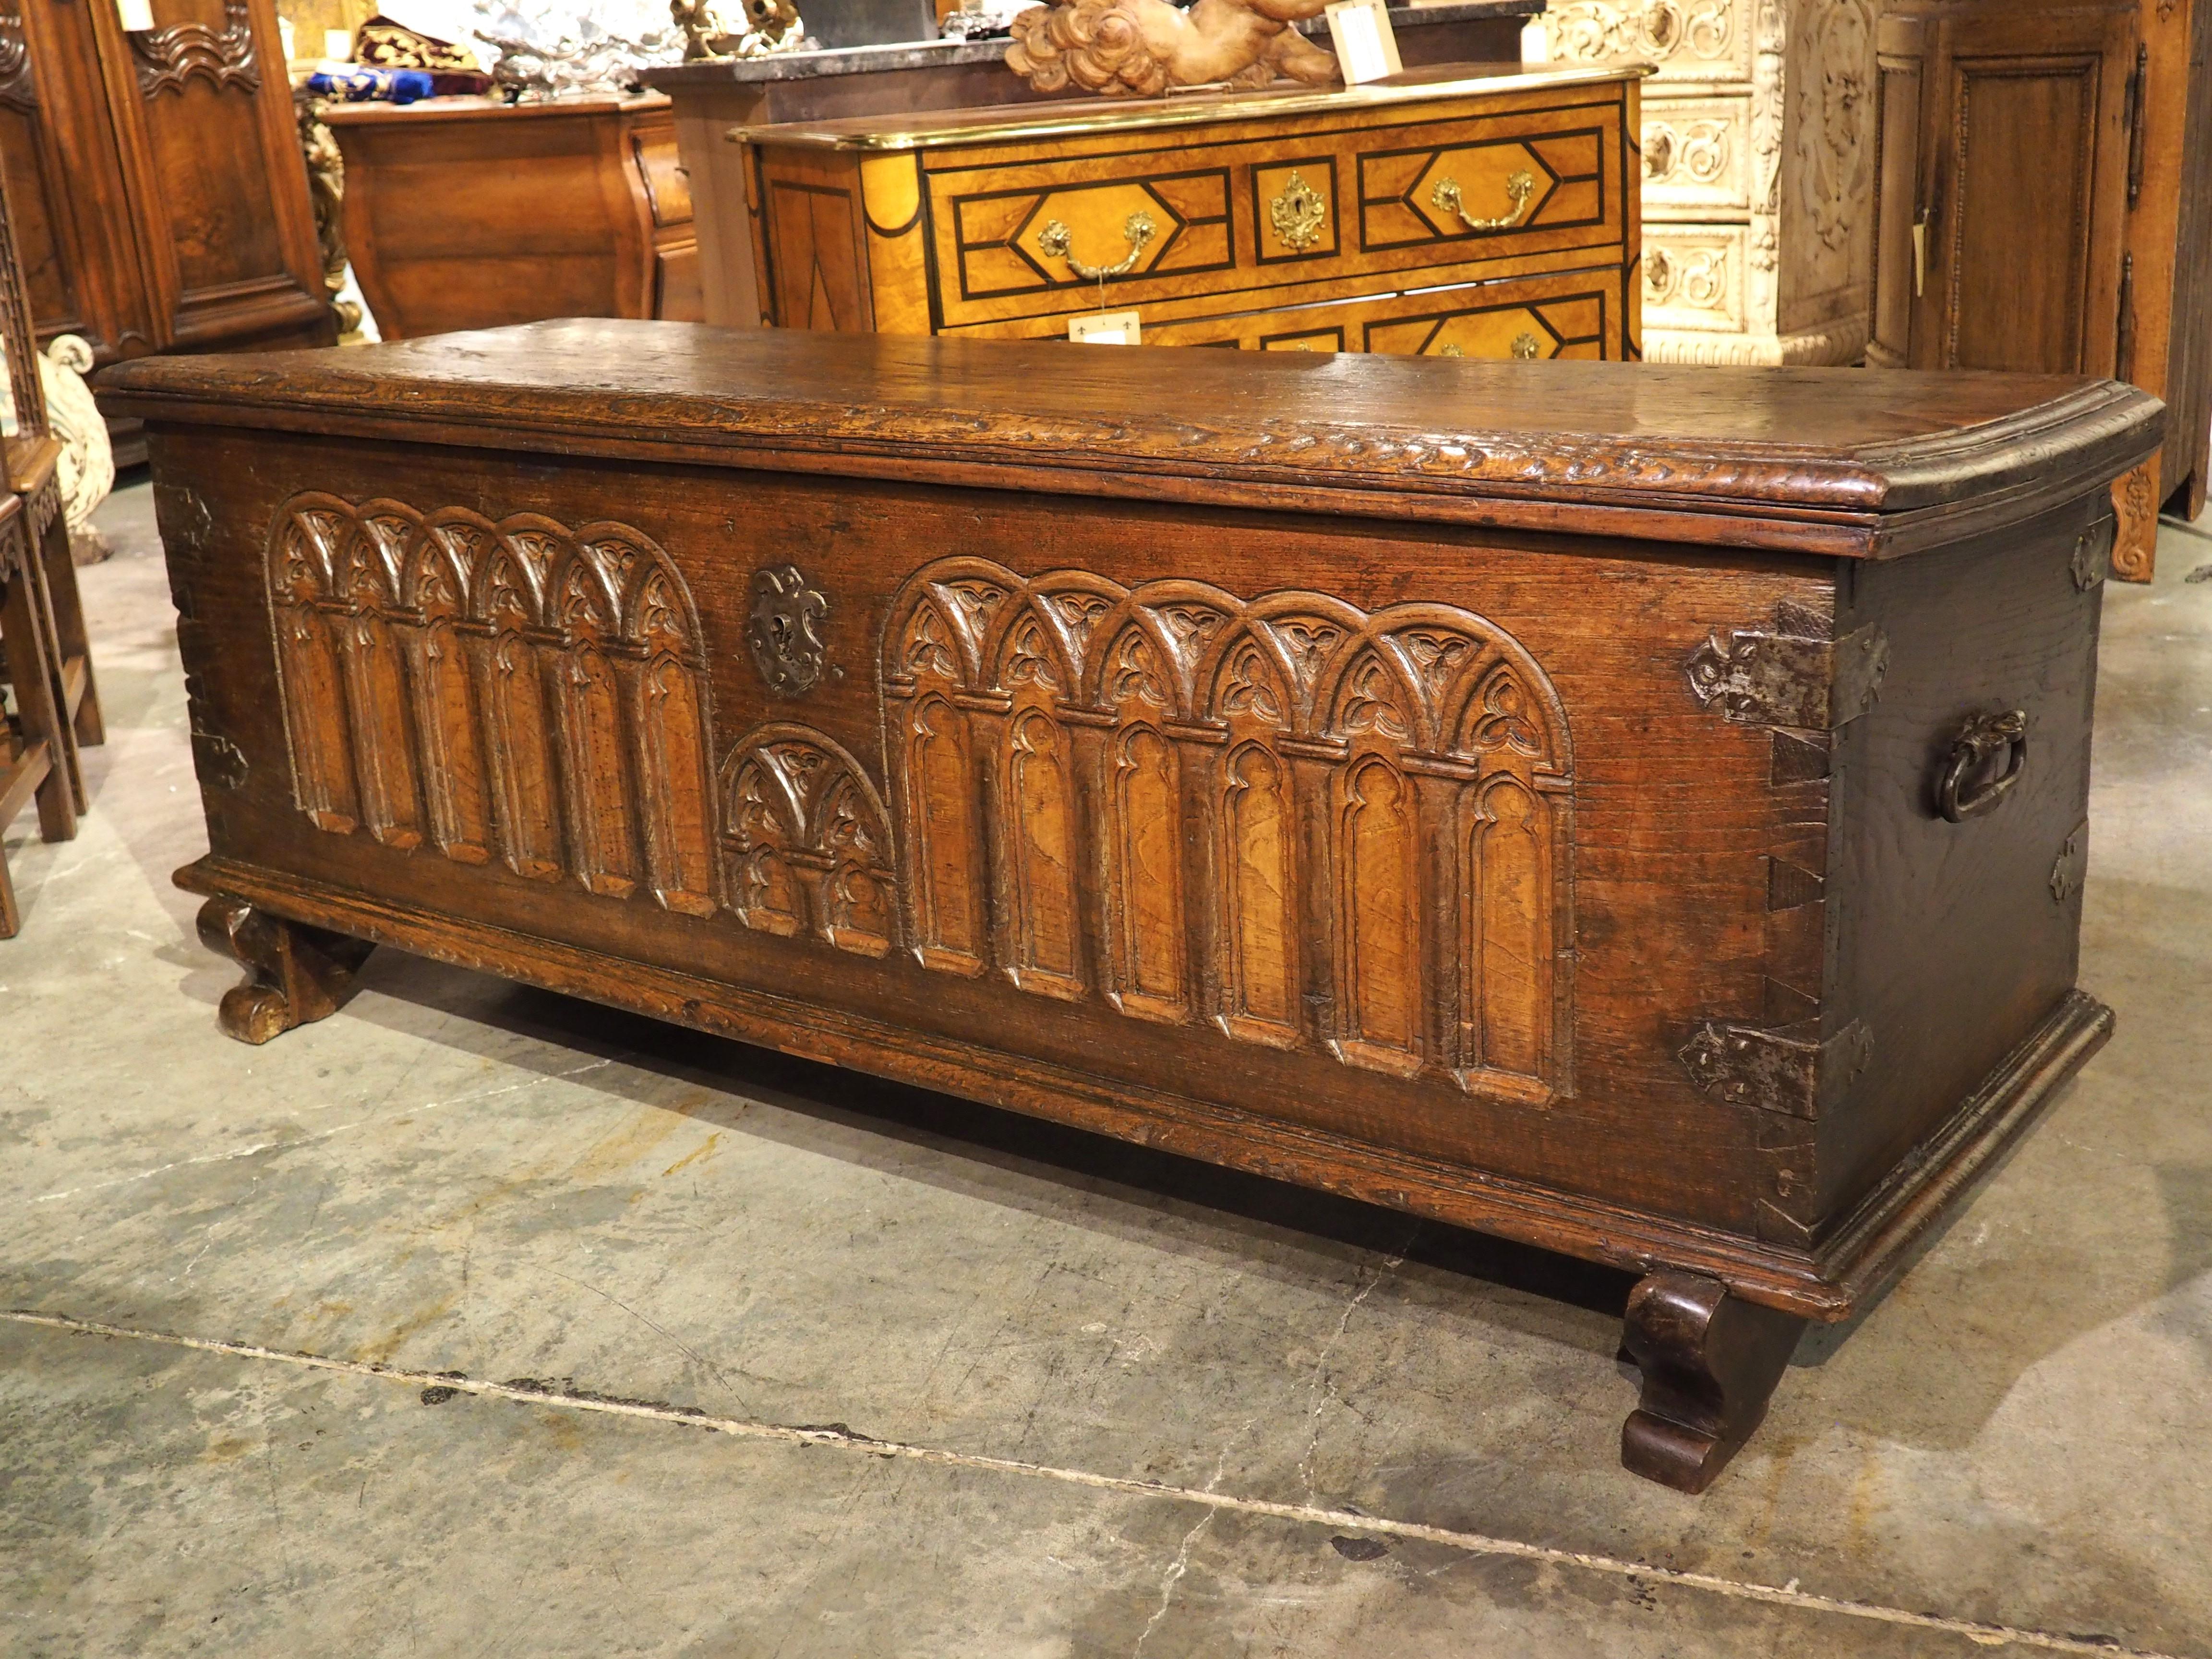 A beautiful display of French craftsmanship, this large Gothic-style trunk was hand-carved in the 1600s from chestnut. The highly detailed front façade features multiple sections of arcading, complete with niches supported by colonnades and filled